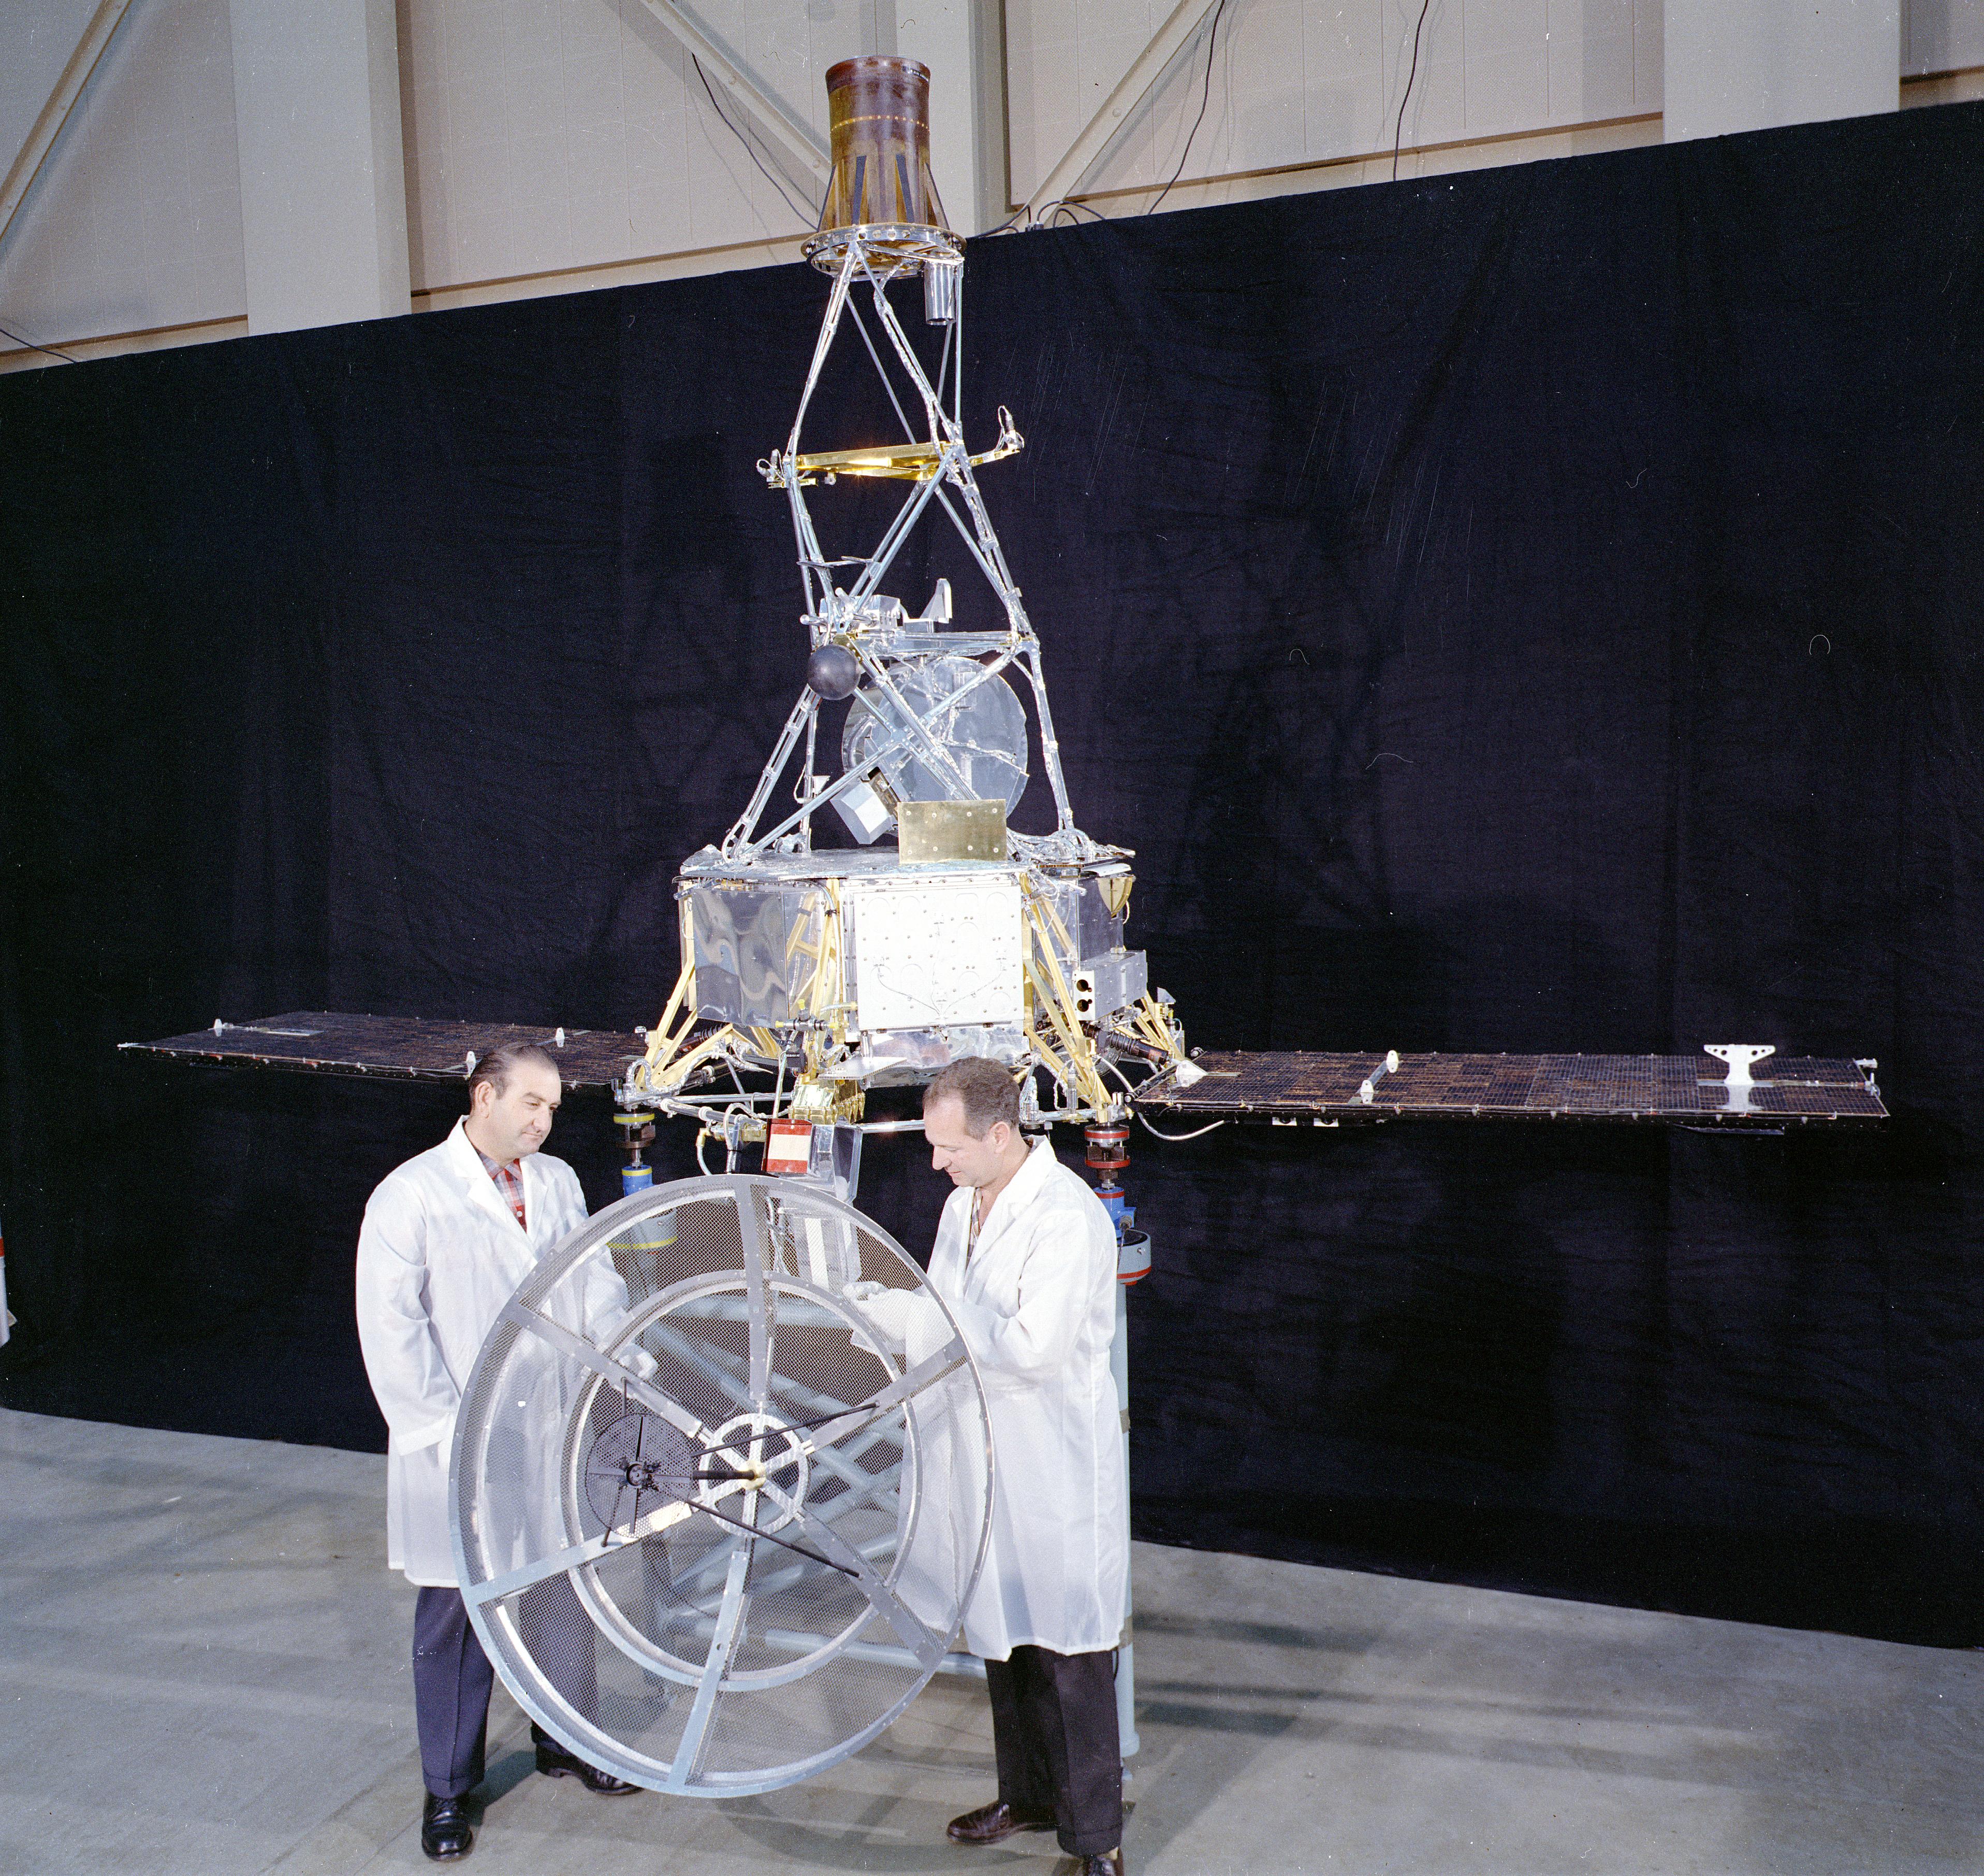 PIA23310: Mariner 1 in JPL's Spacecraft Assembly Facility